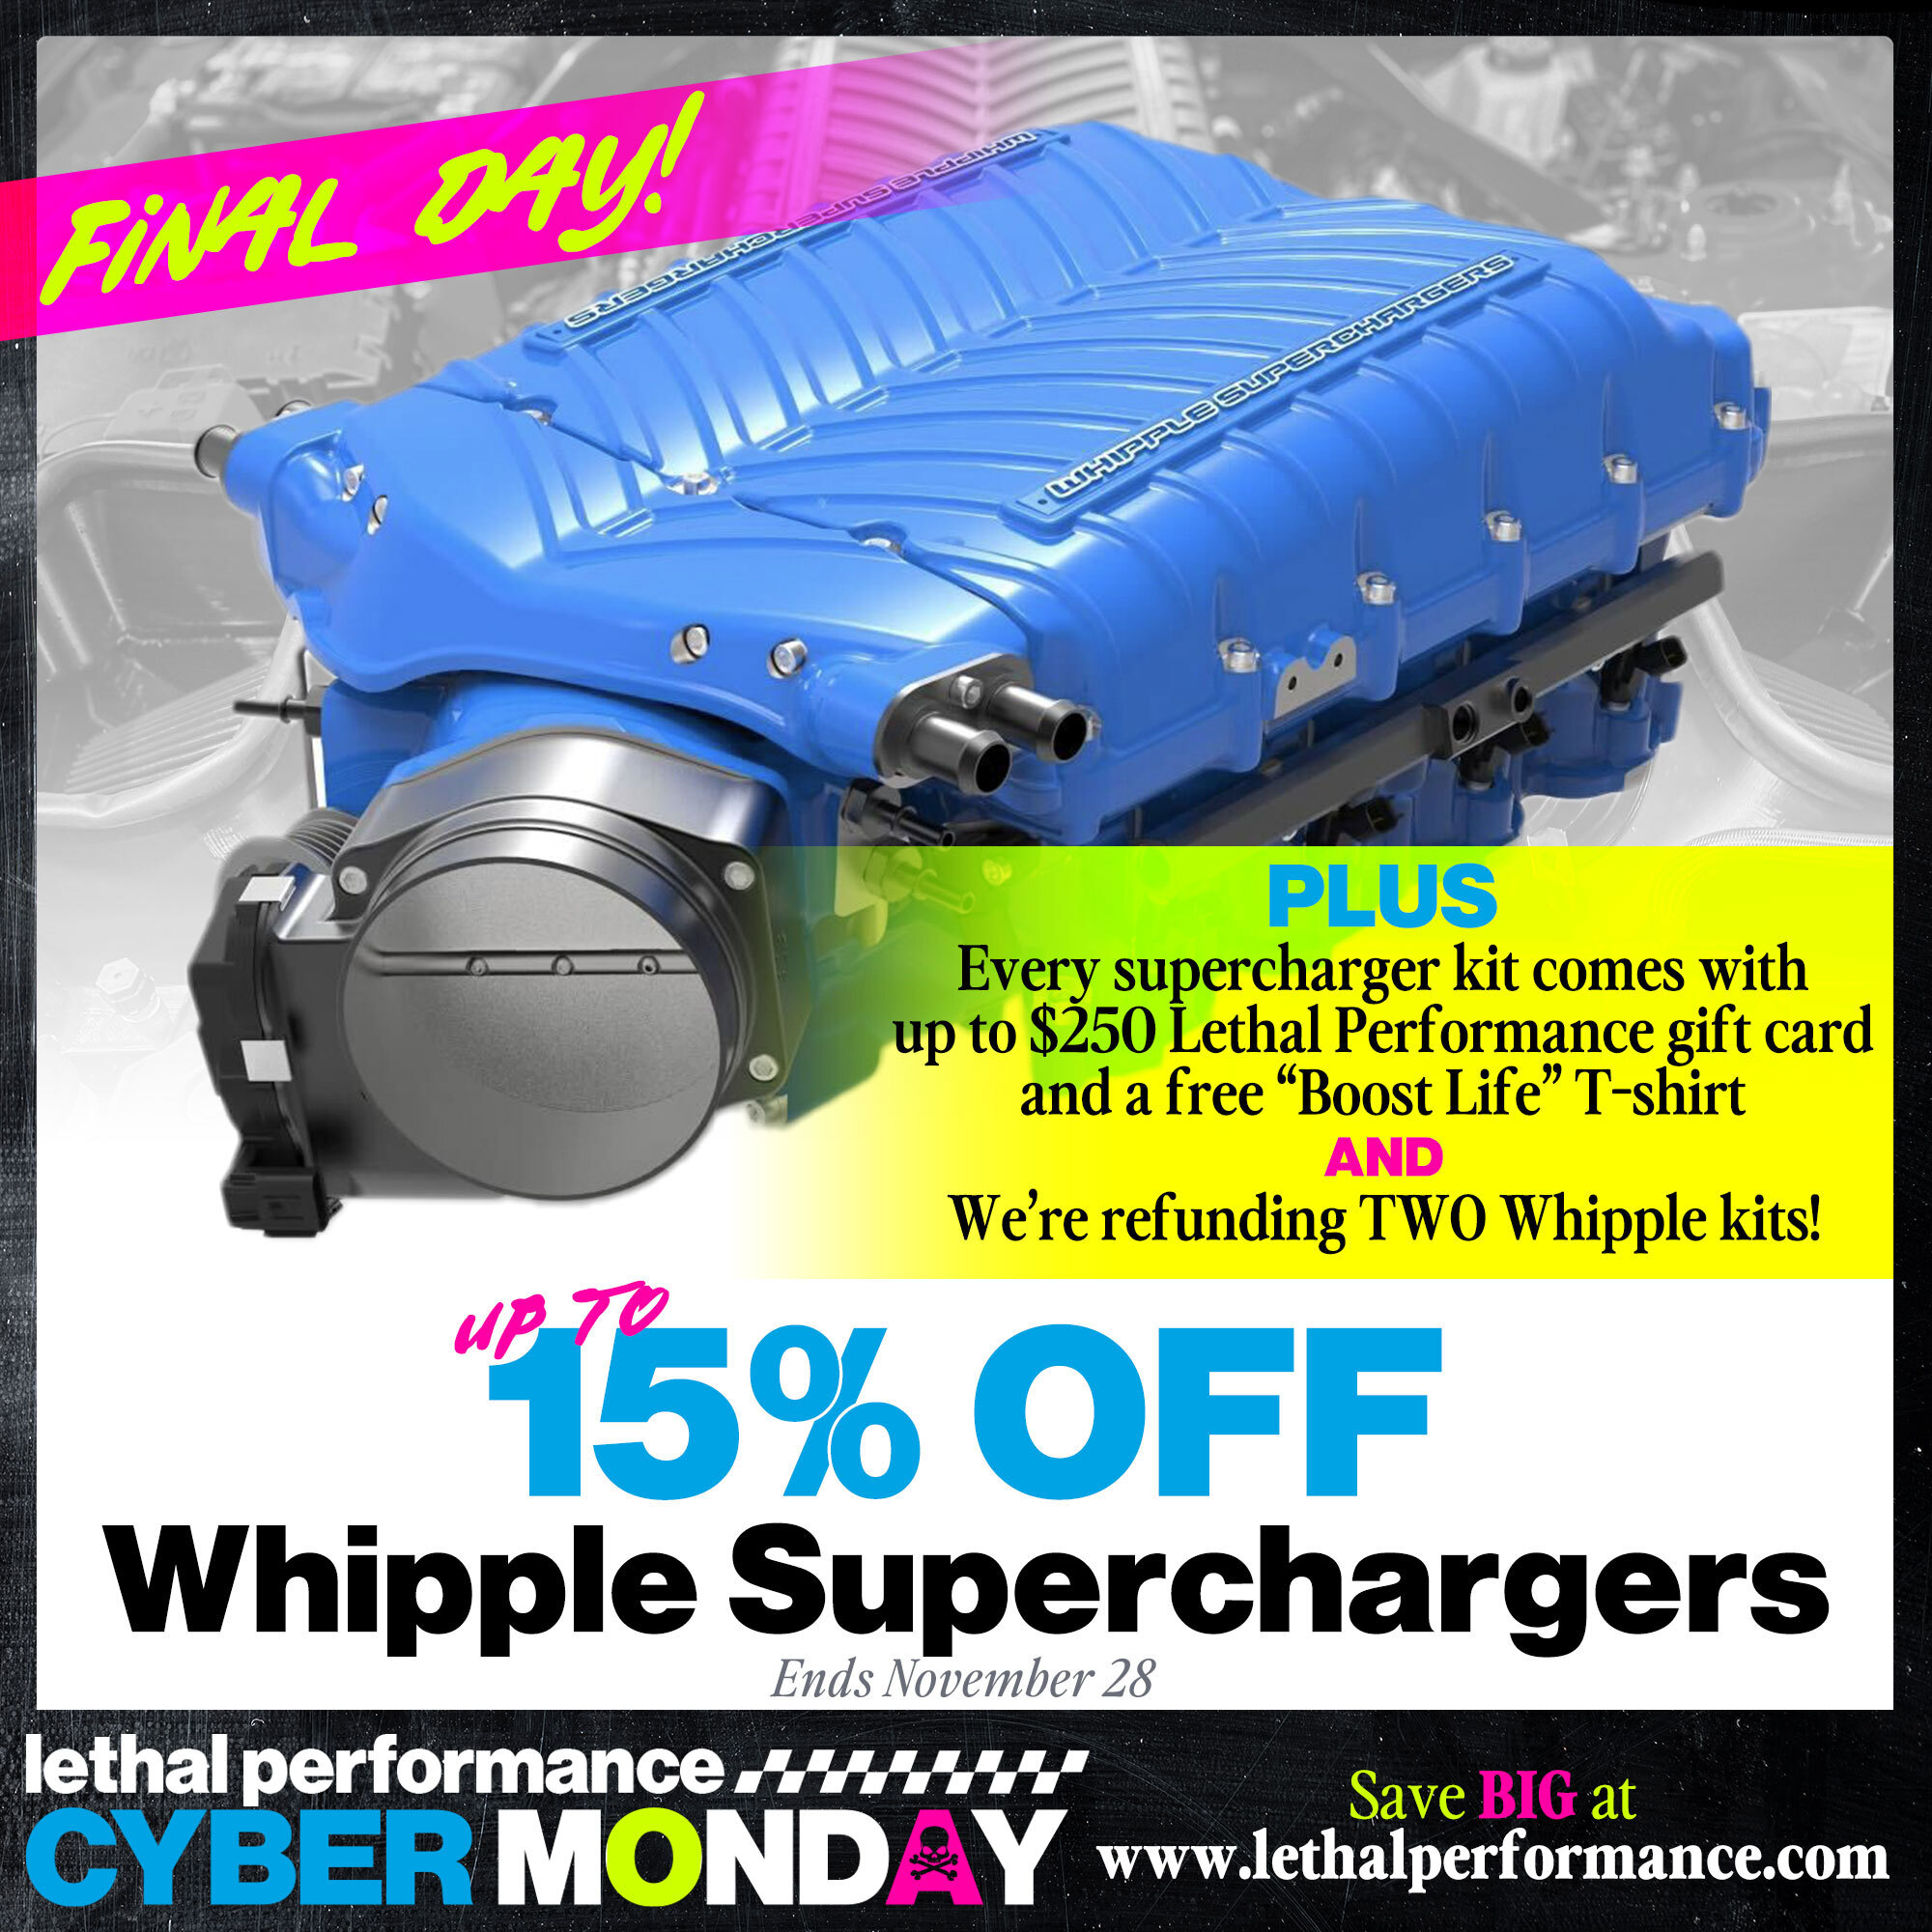 S650 Mustang WHIPPLE SUPERCHARGERS Black Friday Sale @ Lethal Performance - EXTRAS INCLUDED! Plus Supercharger Refunds Whipple_Superchargers_FinalDay (1)